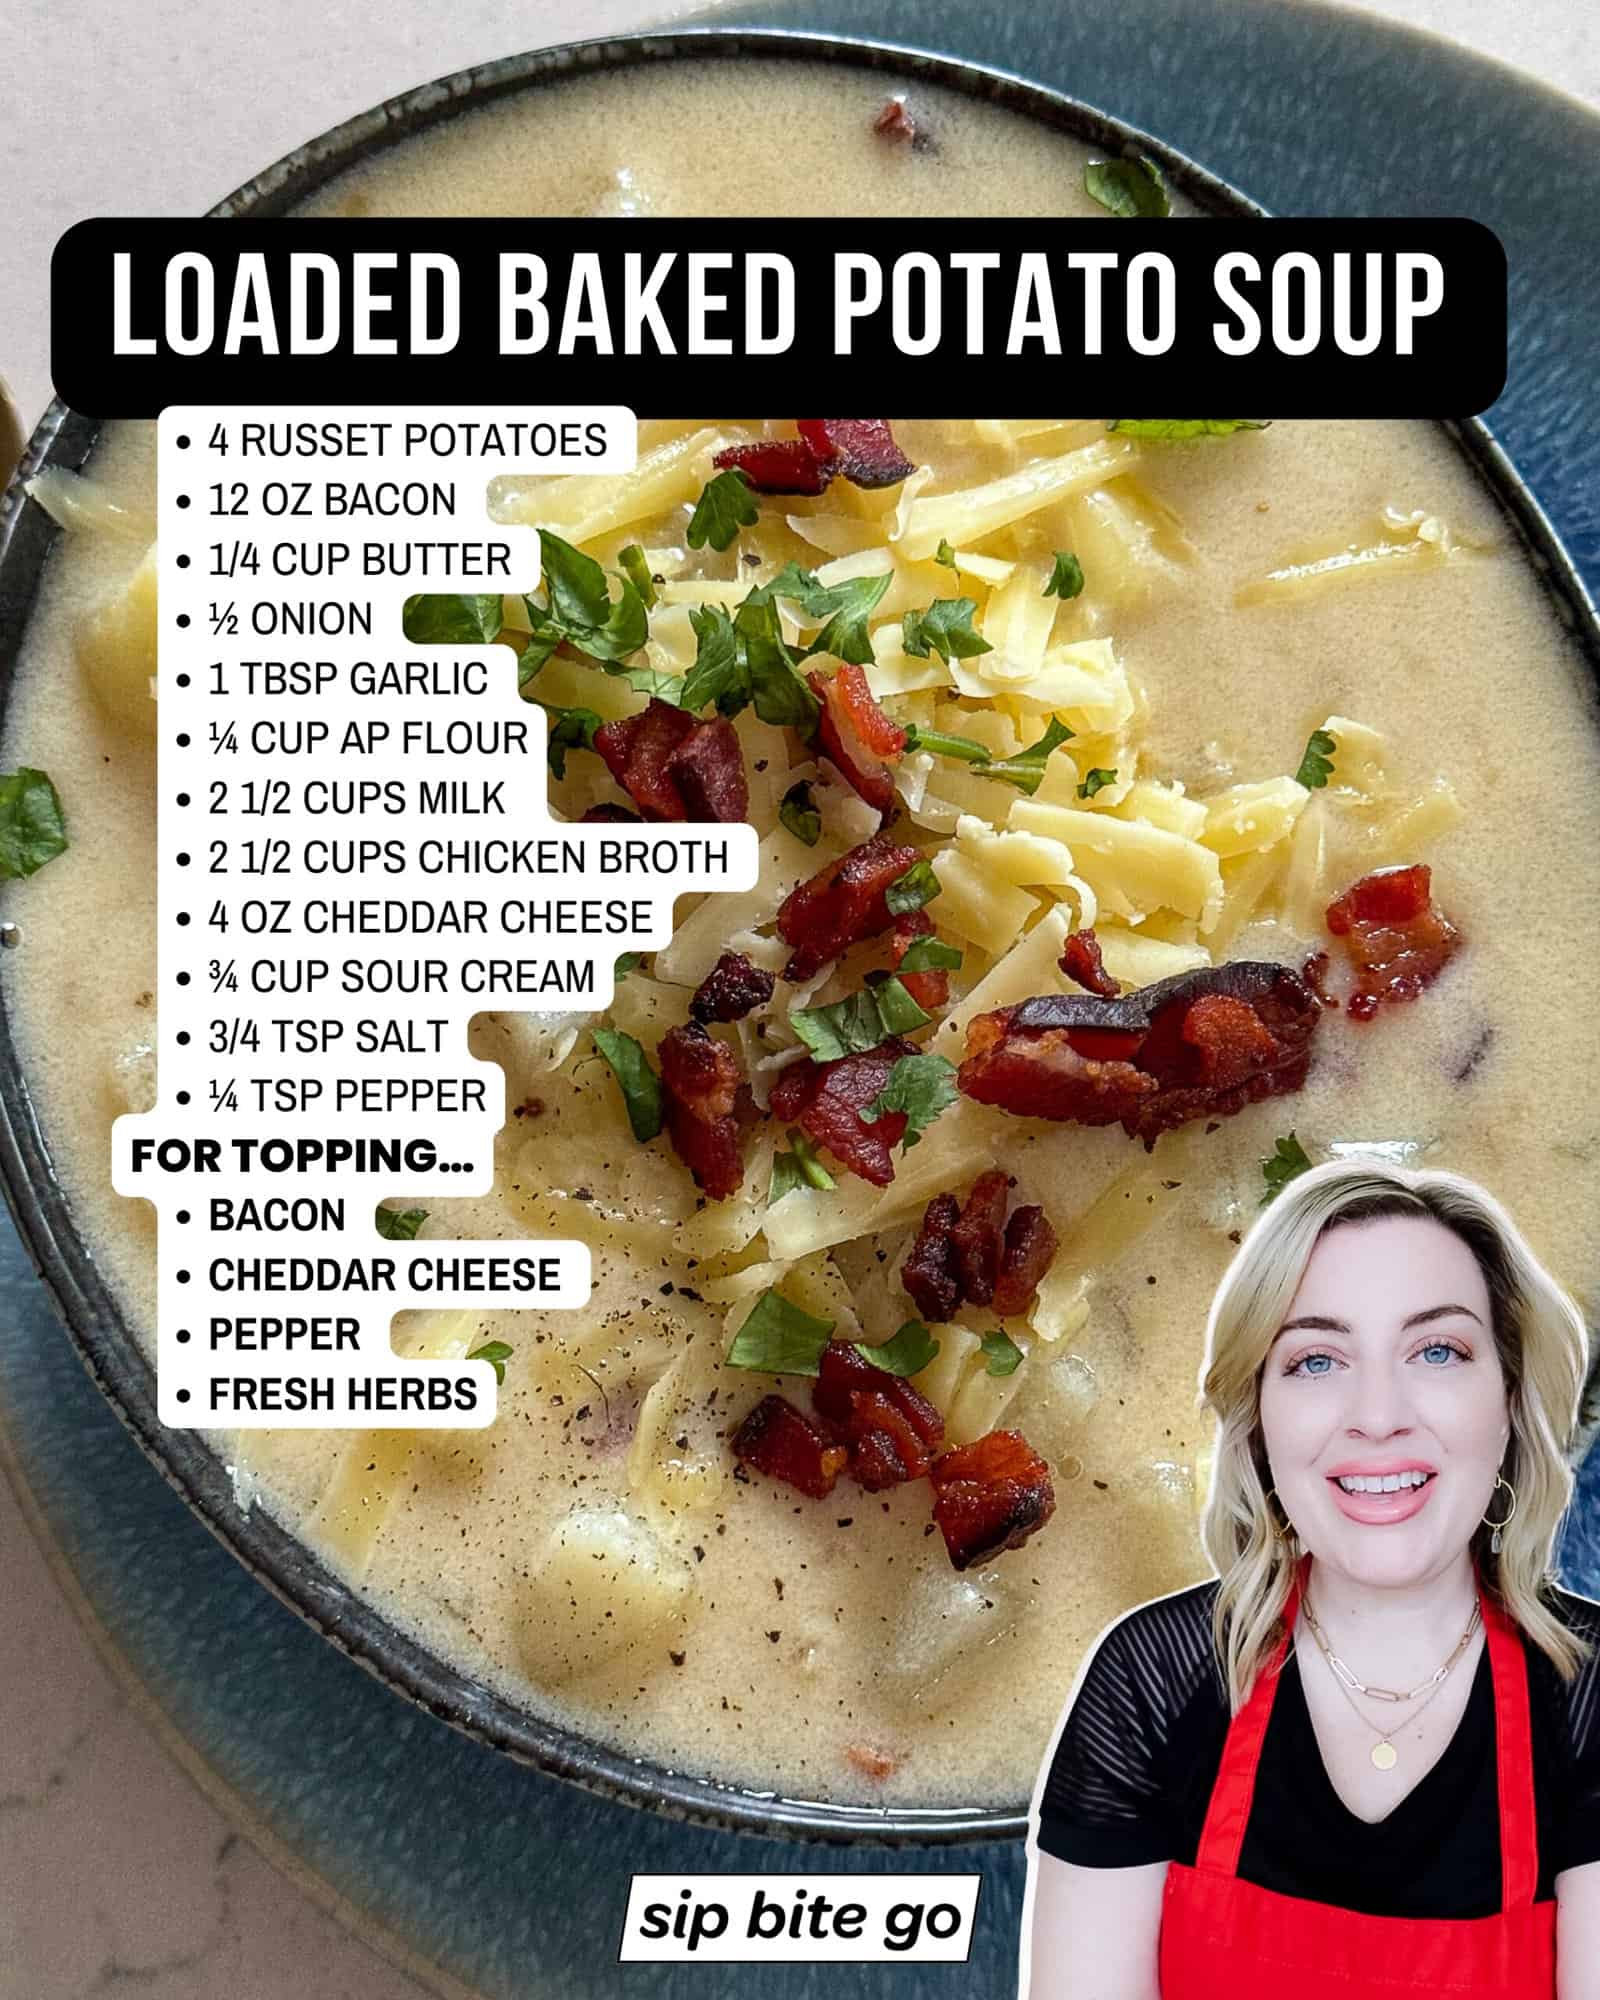 List of recipe ingredients for Loaded Baked Potato Soup